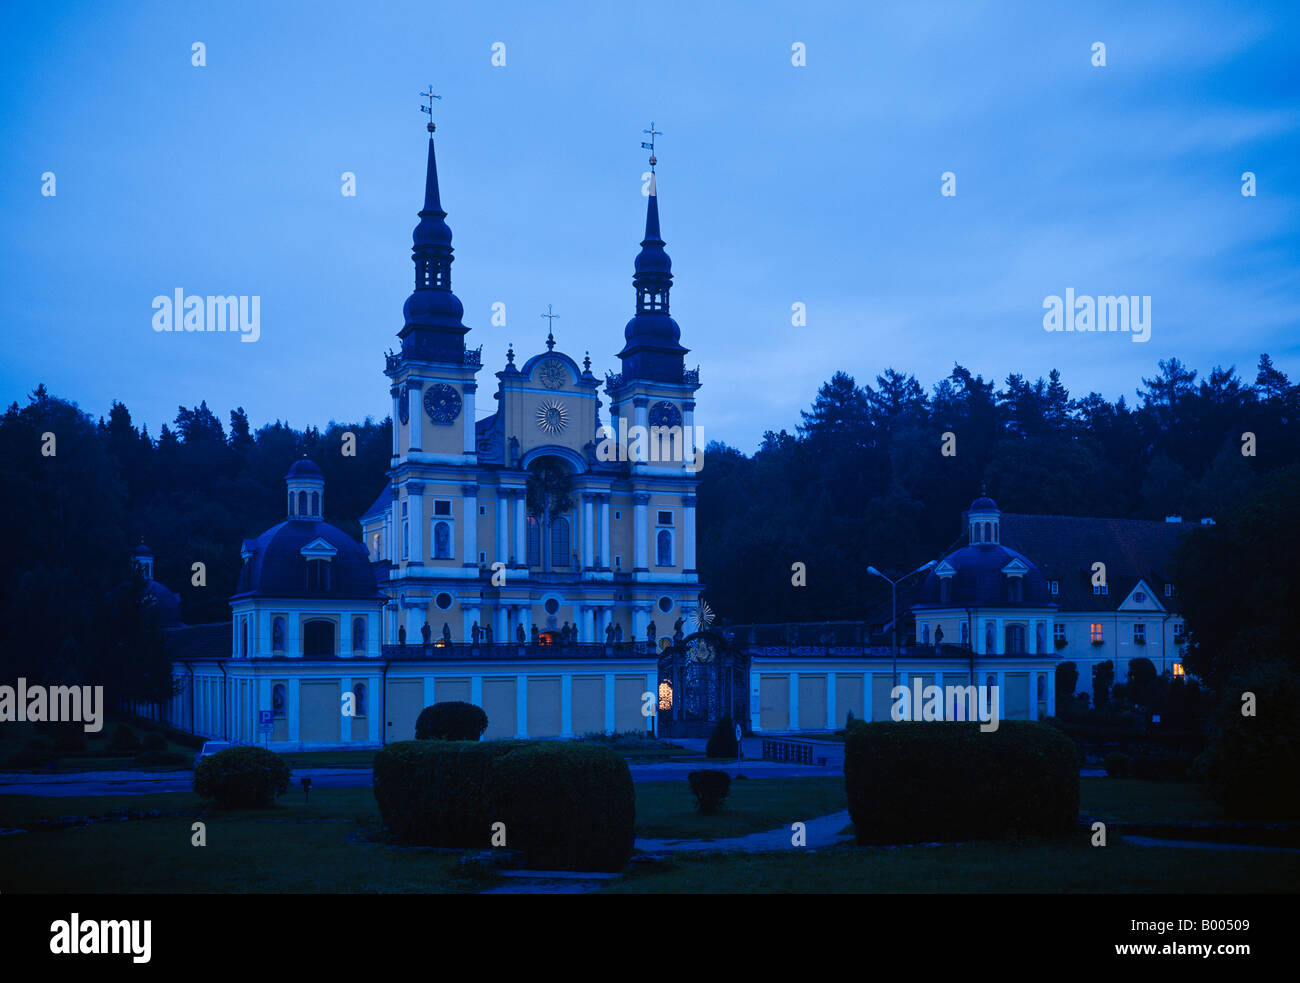 Baroque Pilgrimage Church in Swieta Lipka (Holy Lime) in masuria - blue hour. Next to the twin towers is the pilgrims shelter. Stock Photo